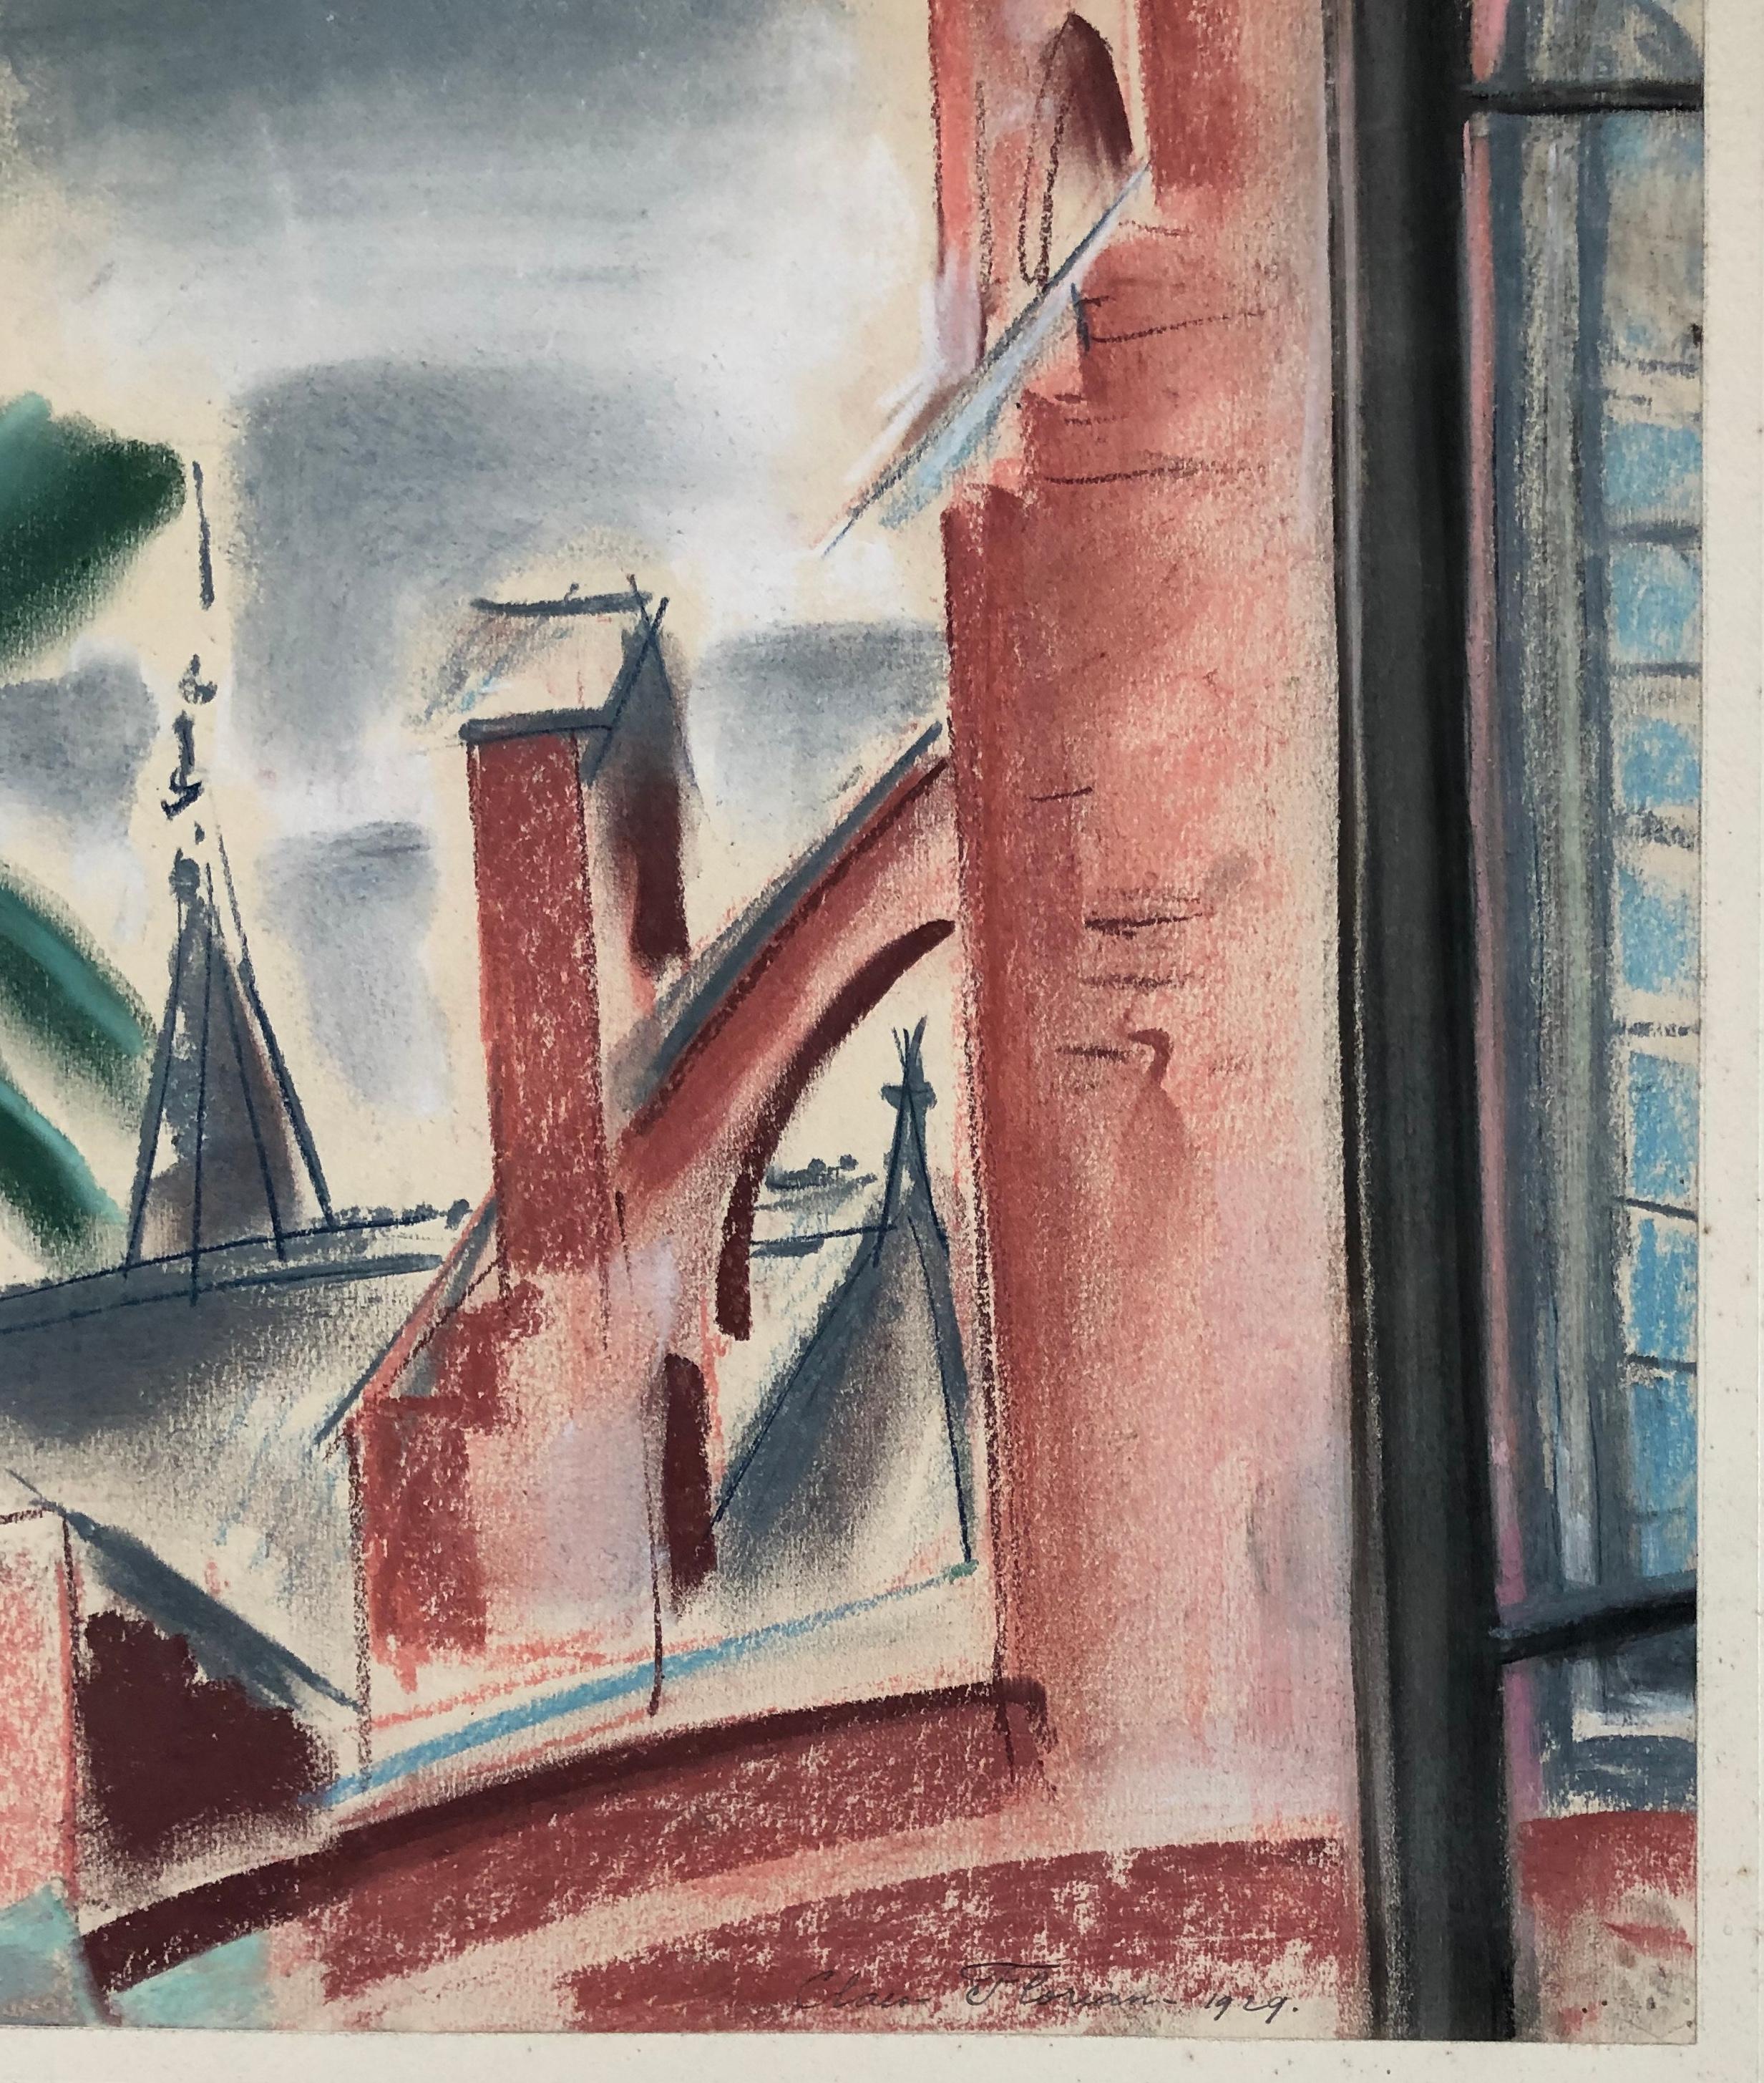 CLAES-THOBOIS Albert. Roof view. Pastel. Signed and dated 1929. 2